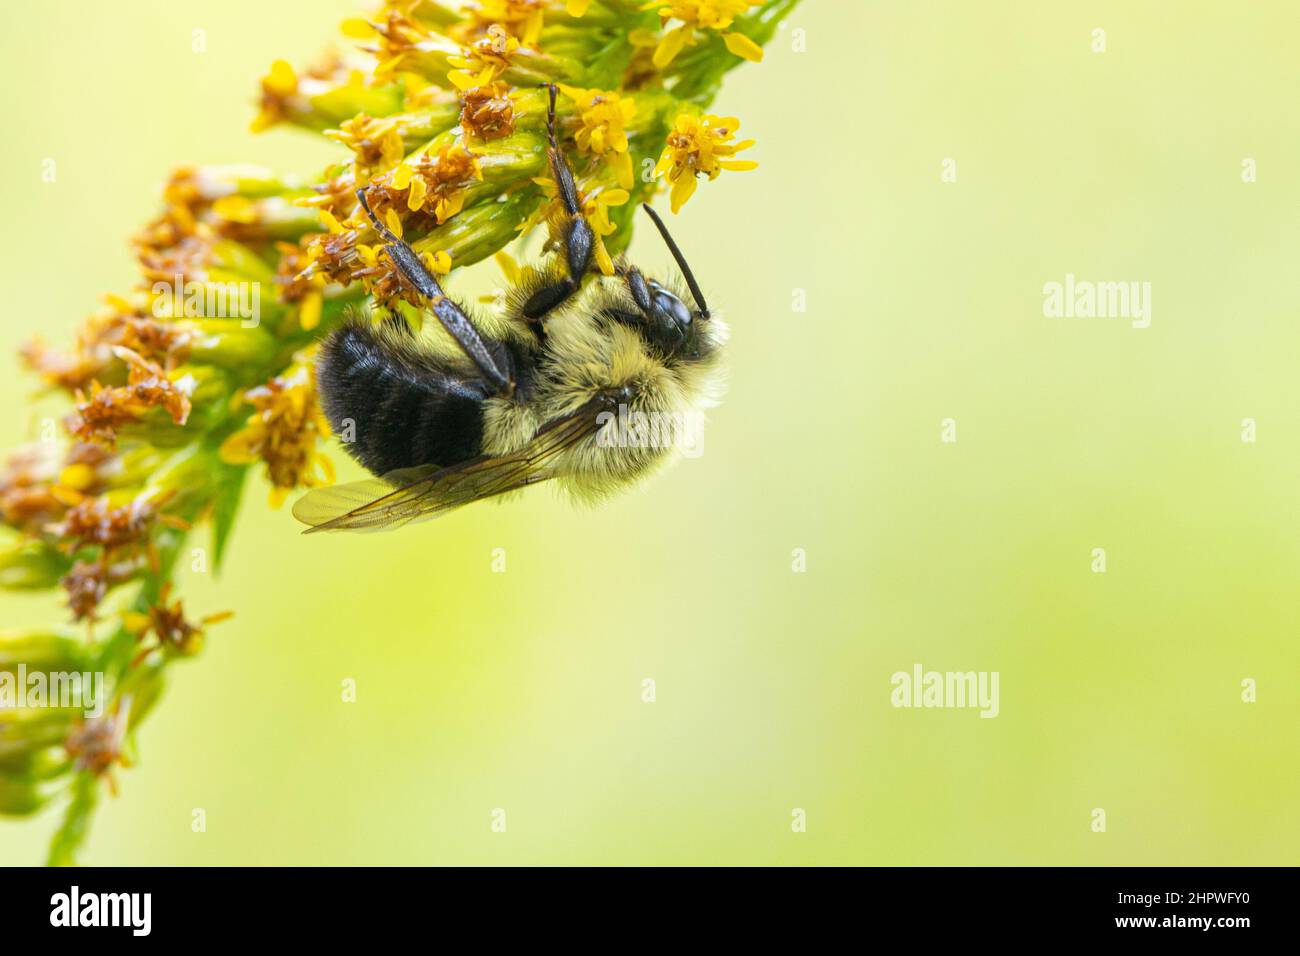 Extreme close up of a Common Eastern Bumble Bee climbing a branch of yellow flowers Stock Photo